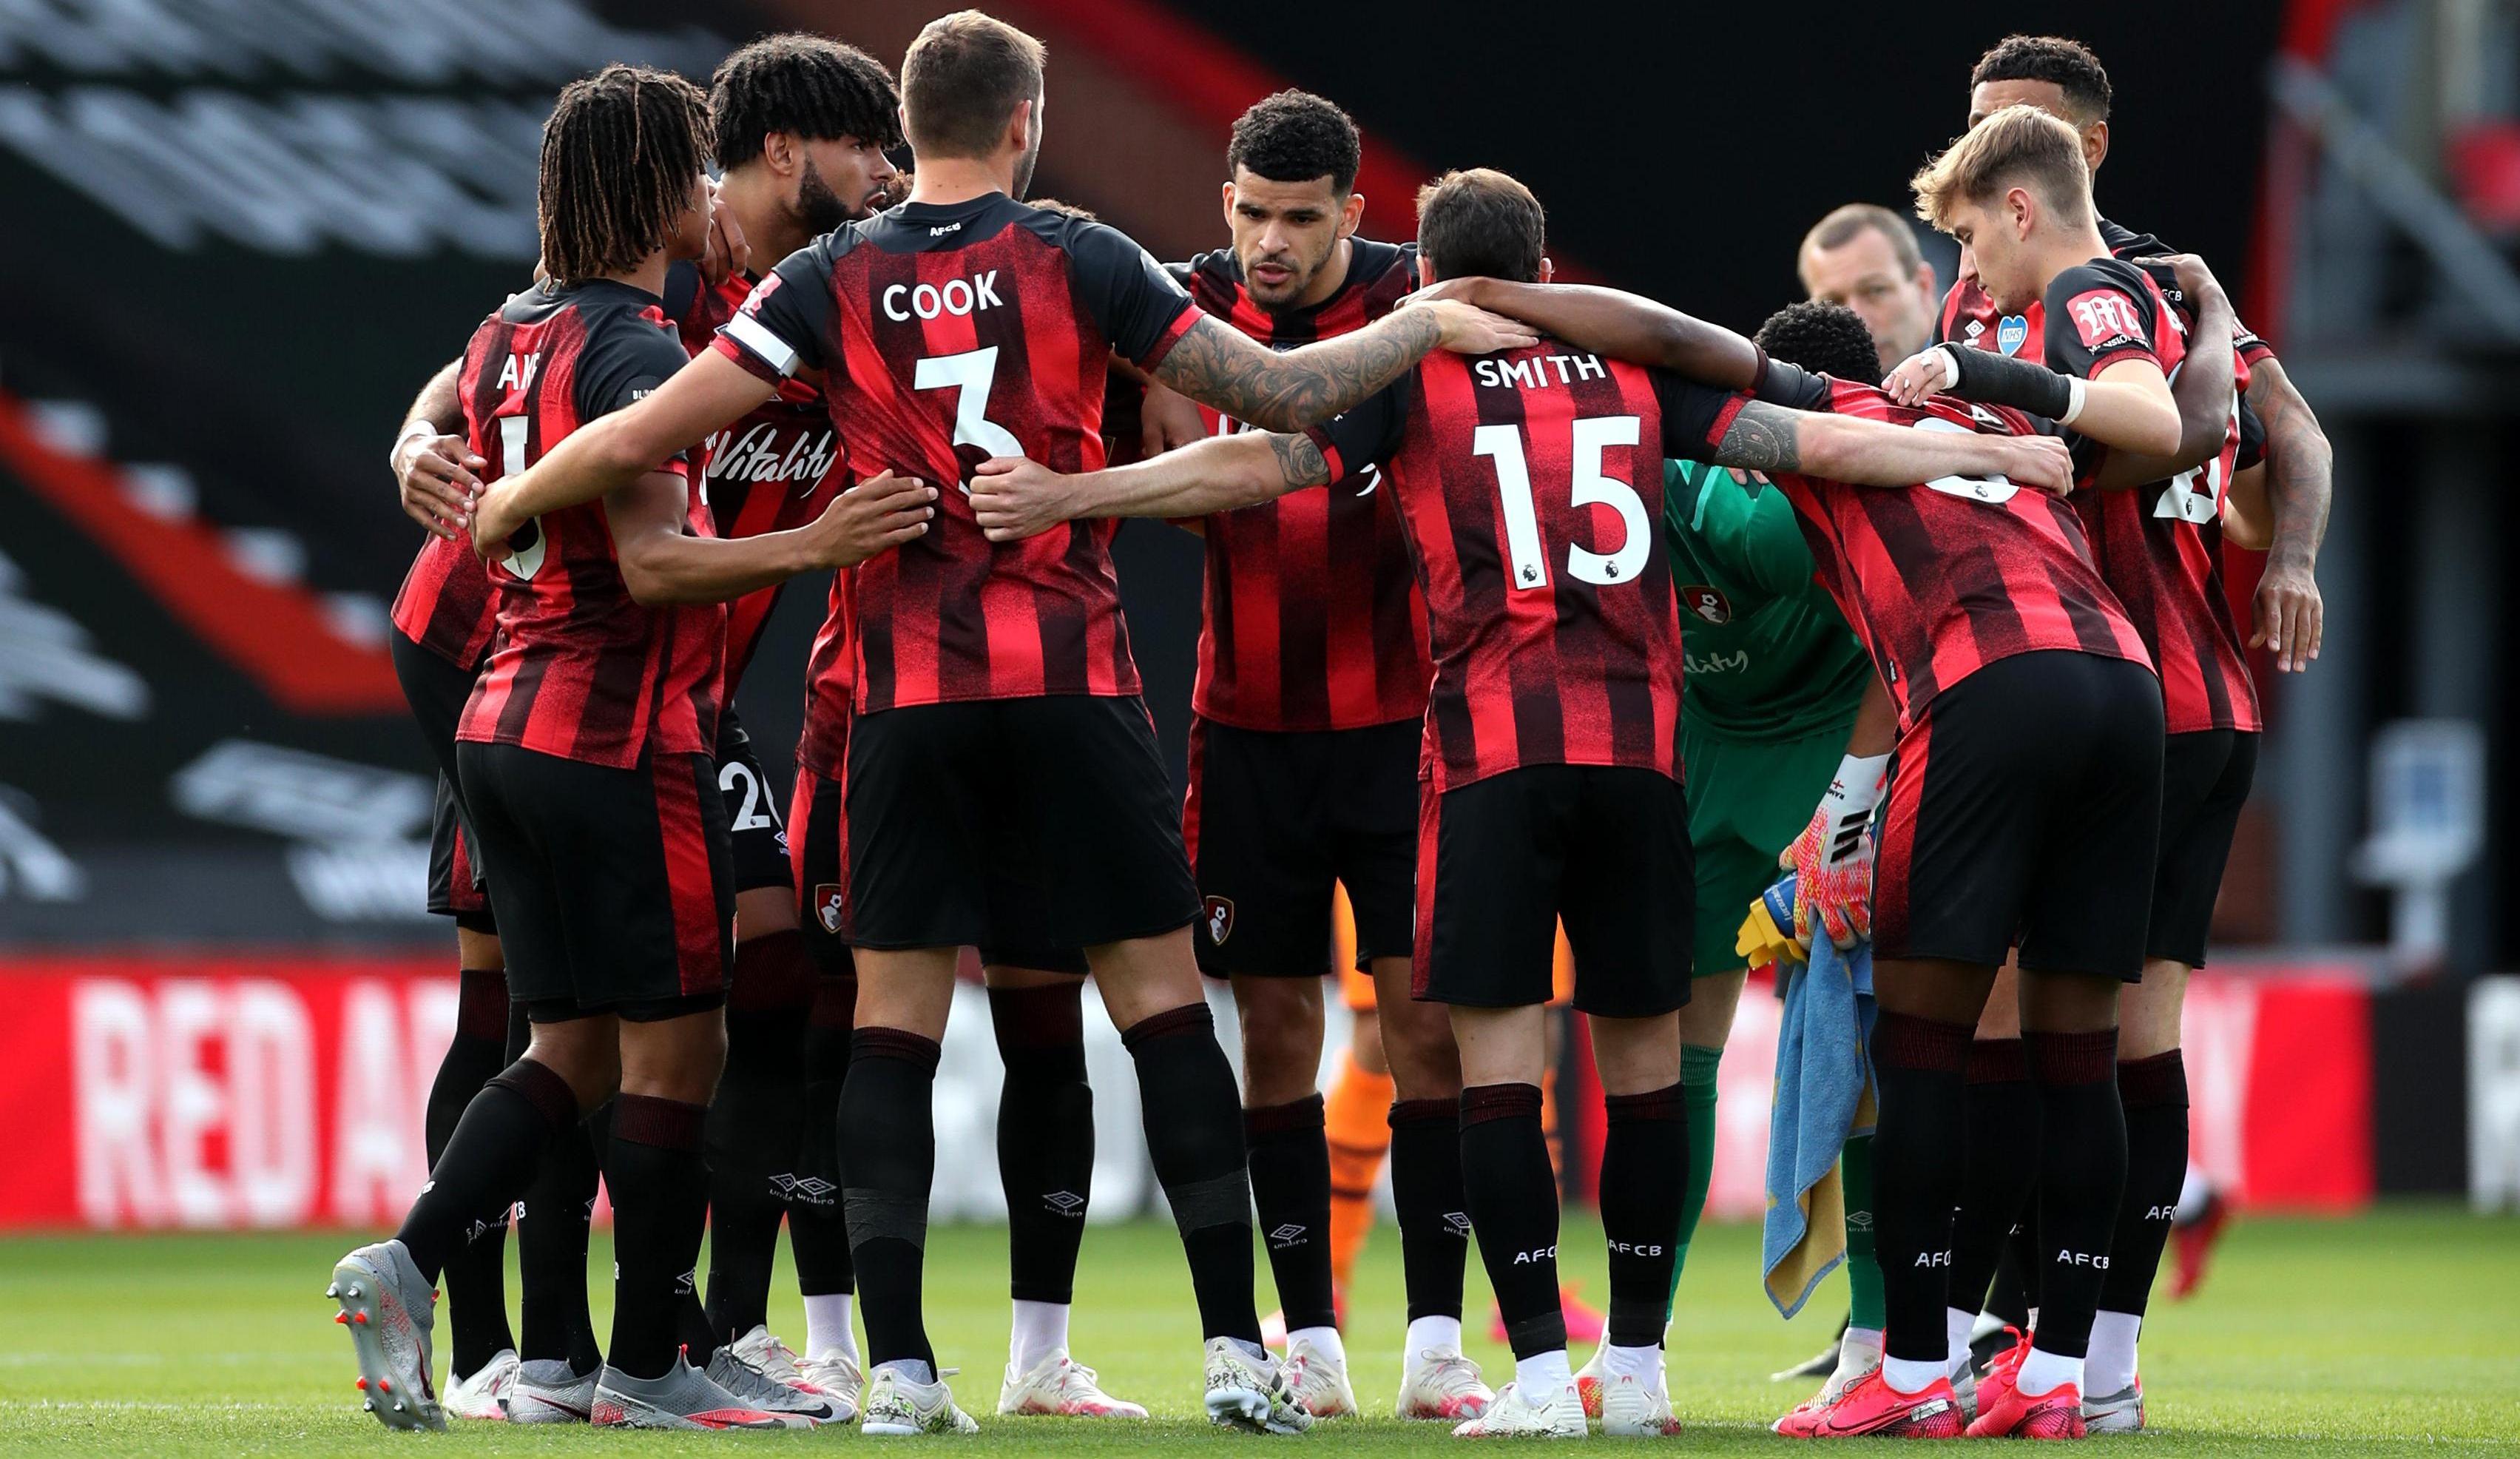 15-facts-about-afc-bournemouth